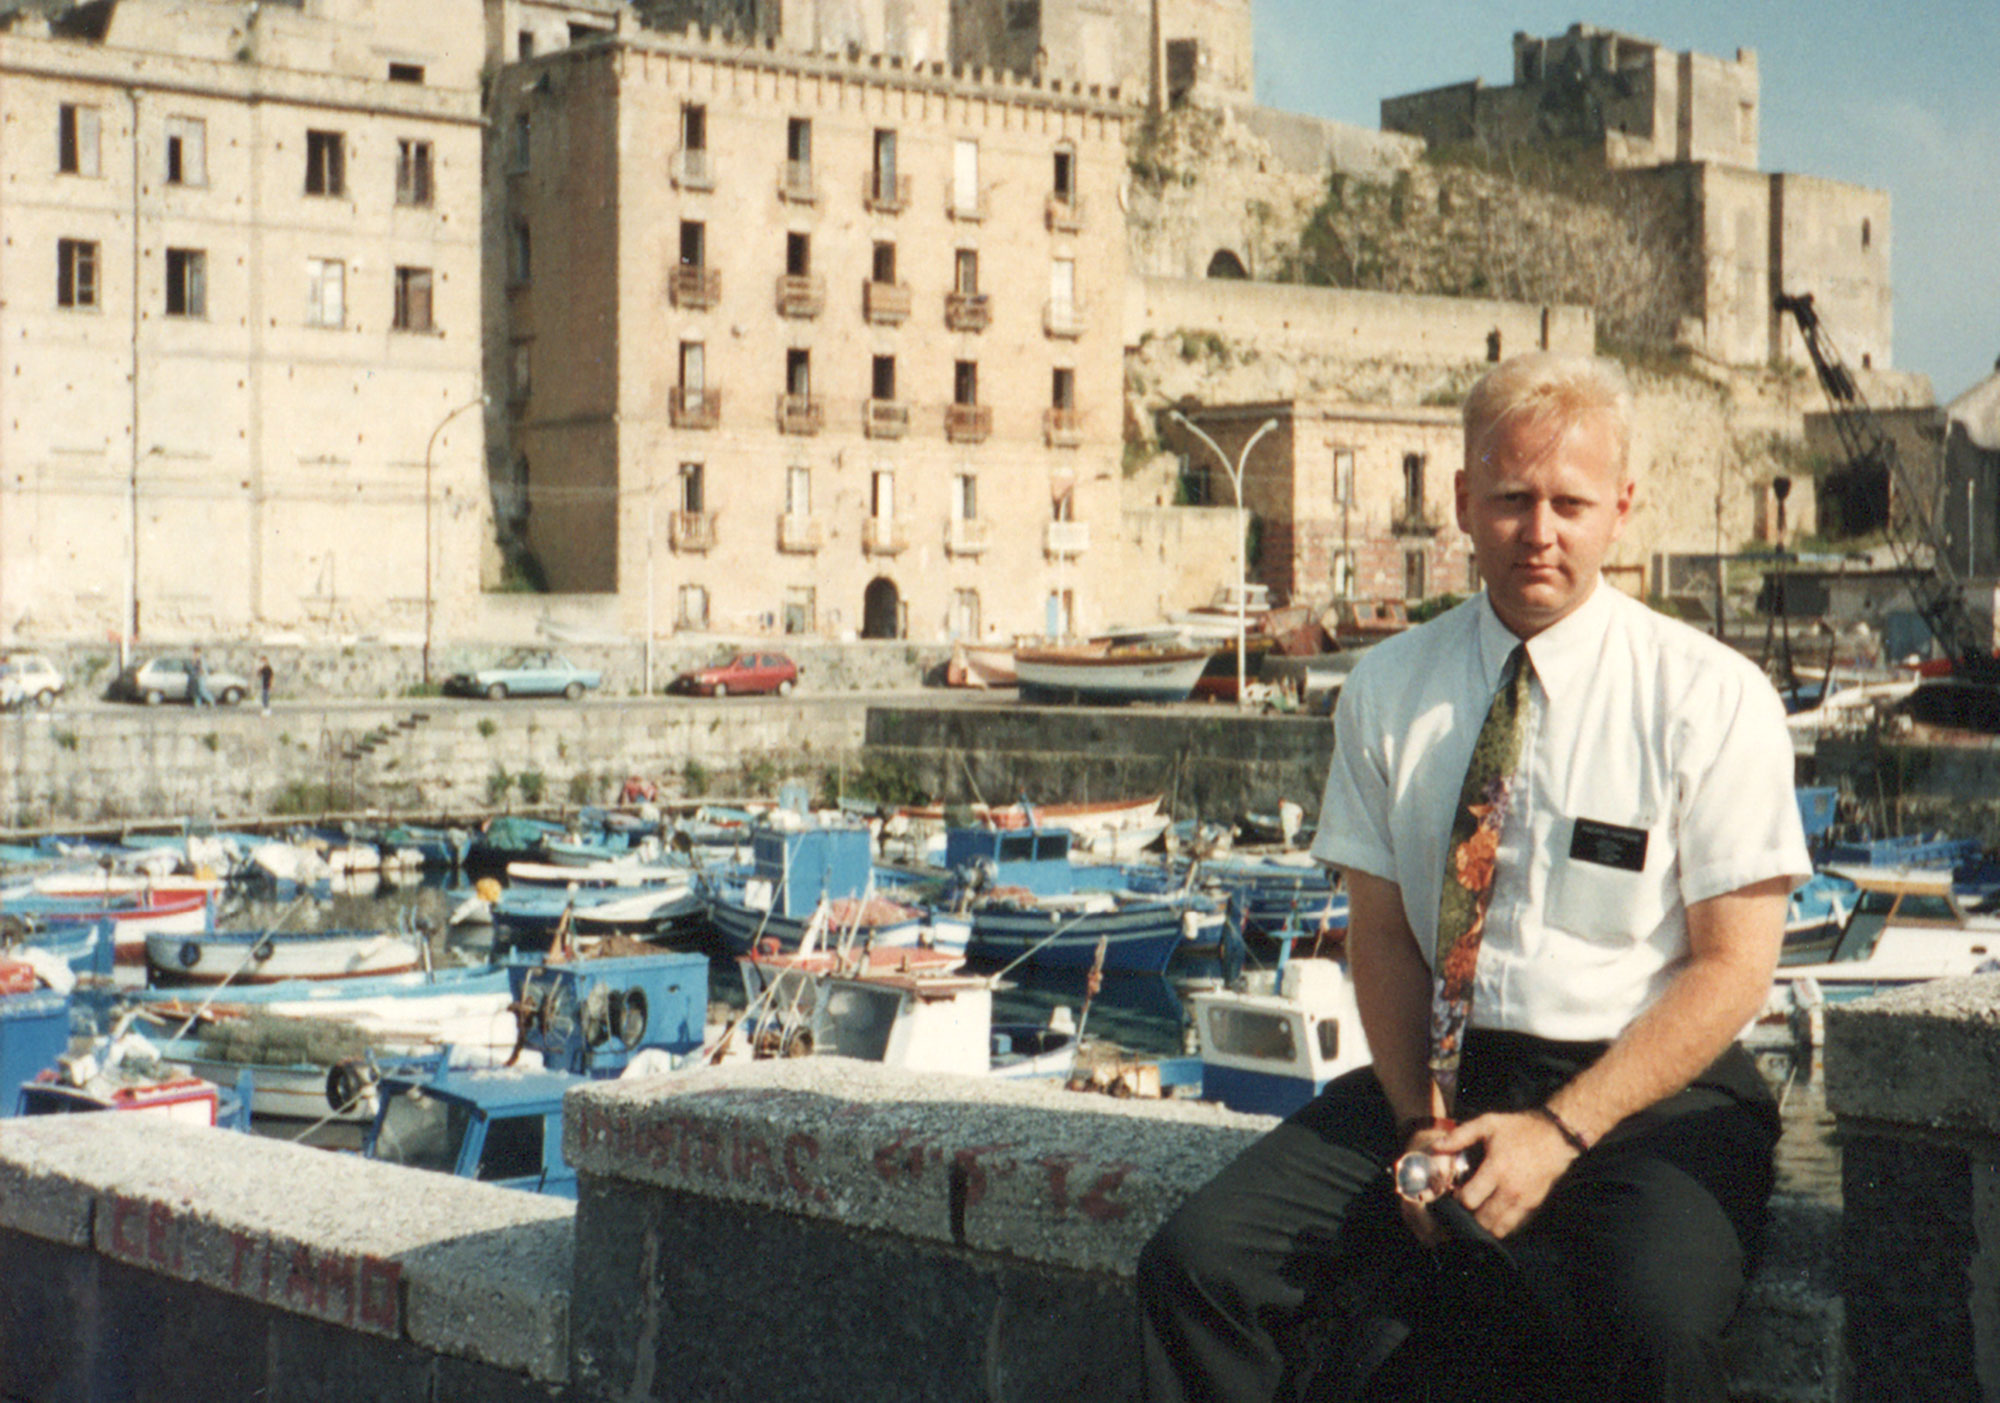 In Pozzuoli (Napoli), Italy, as a missionary in 1995, a site of Paul's ancient passing.